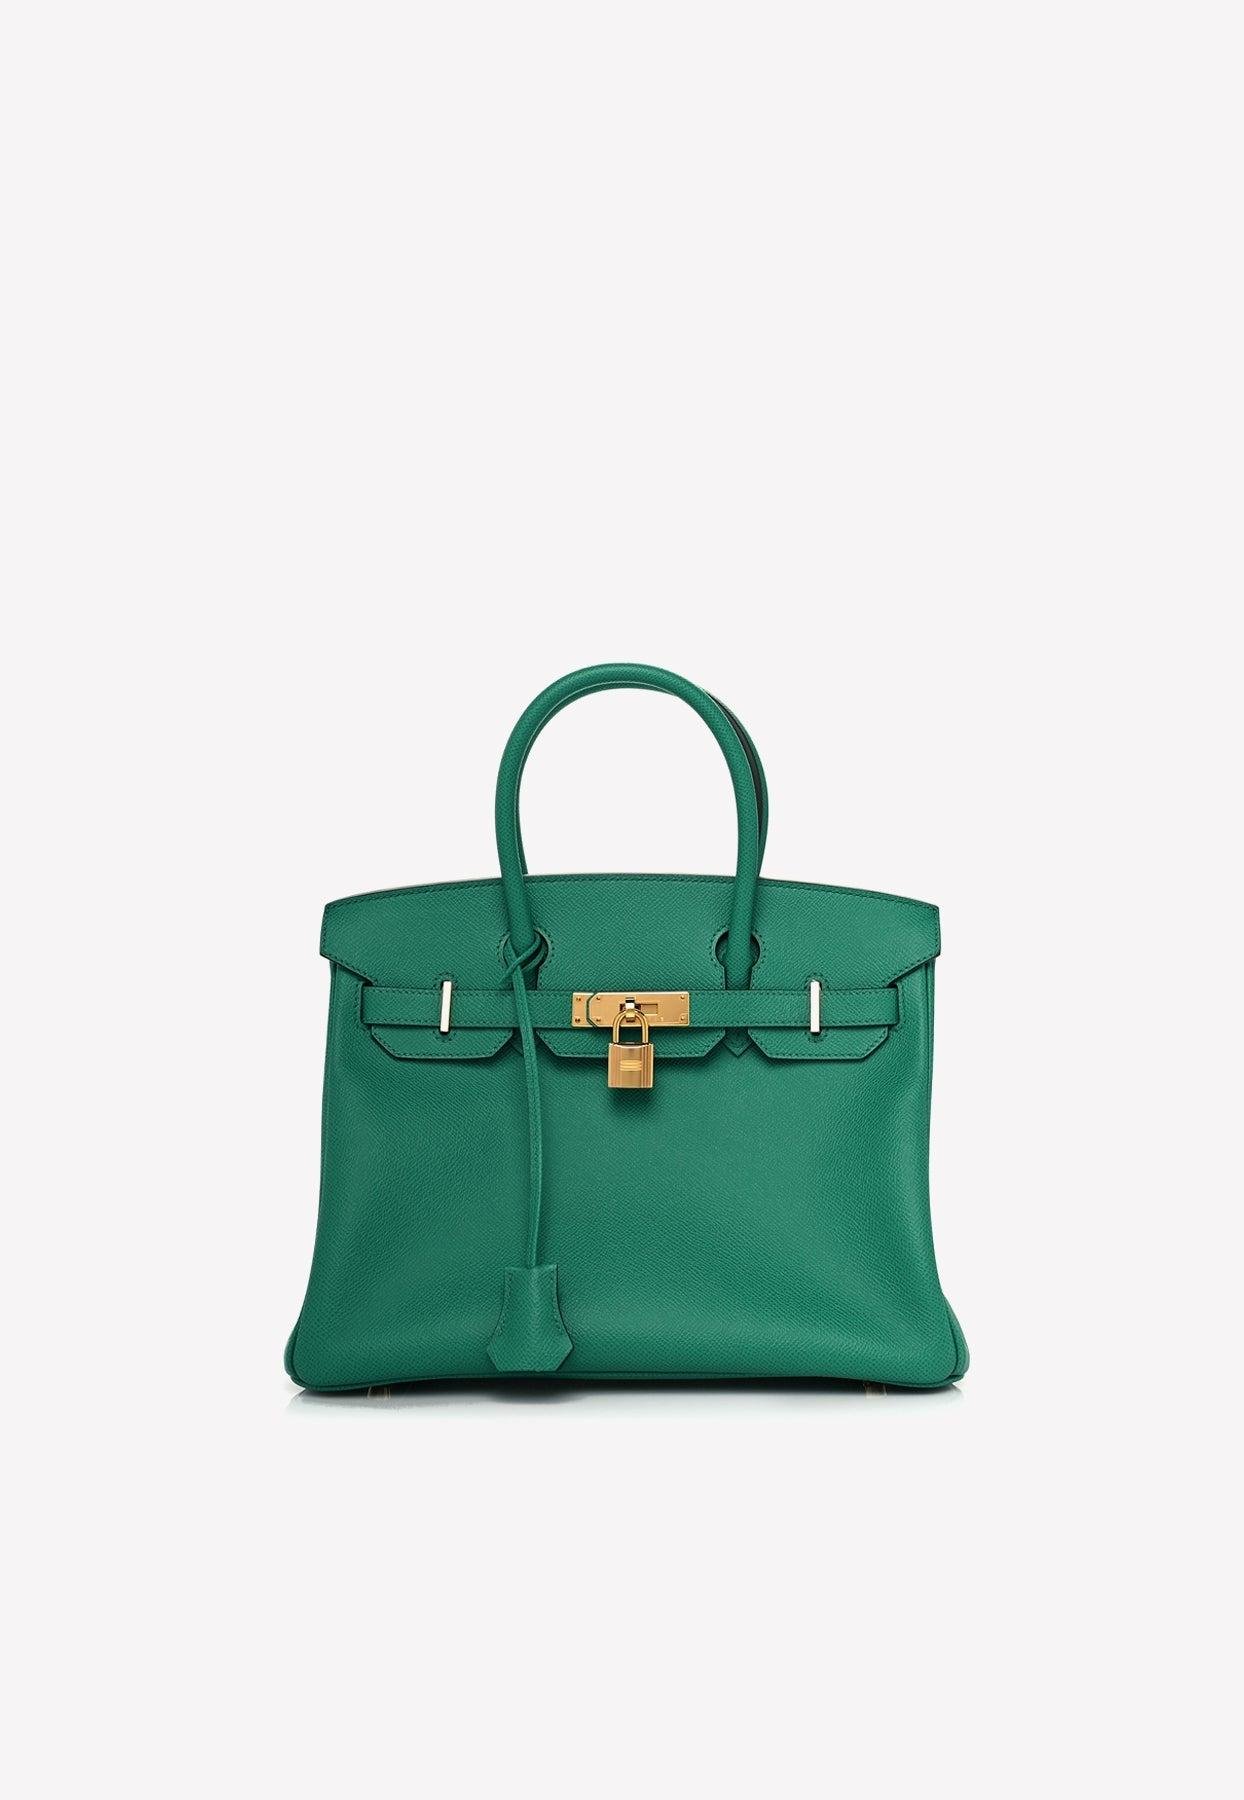 A VERT AMANDE EPSOM LEATHER MINI CONSTANCE 18 WITH GOLD HARDWARE